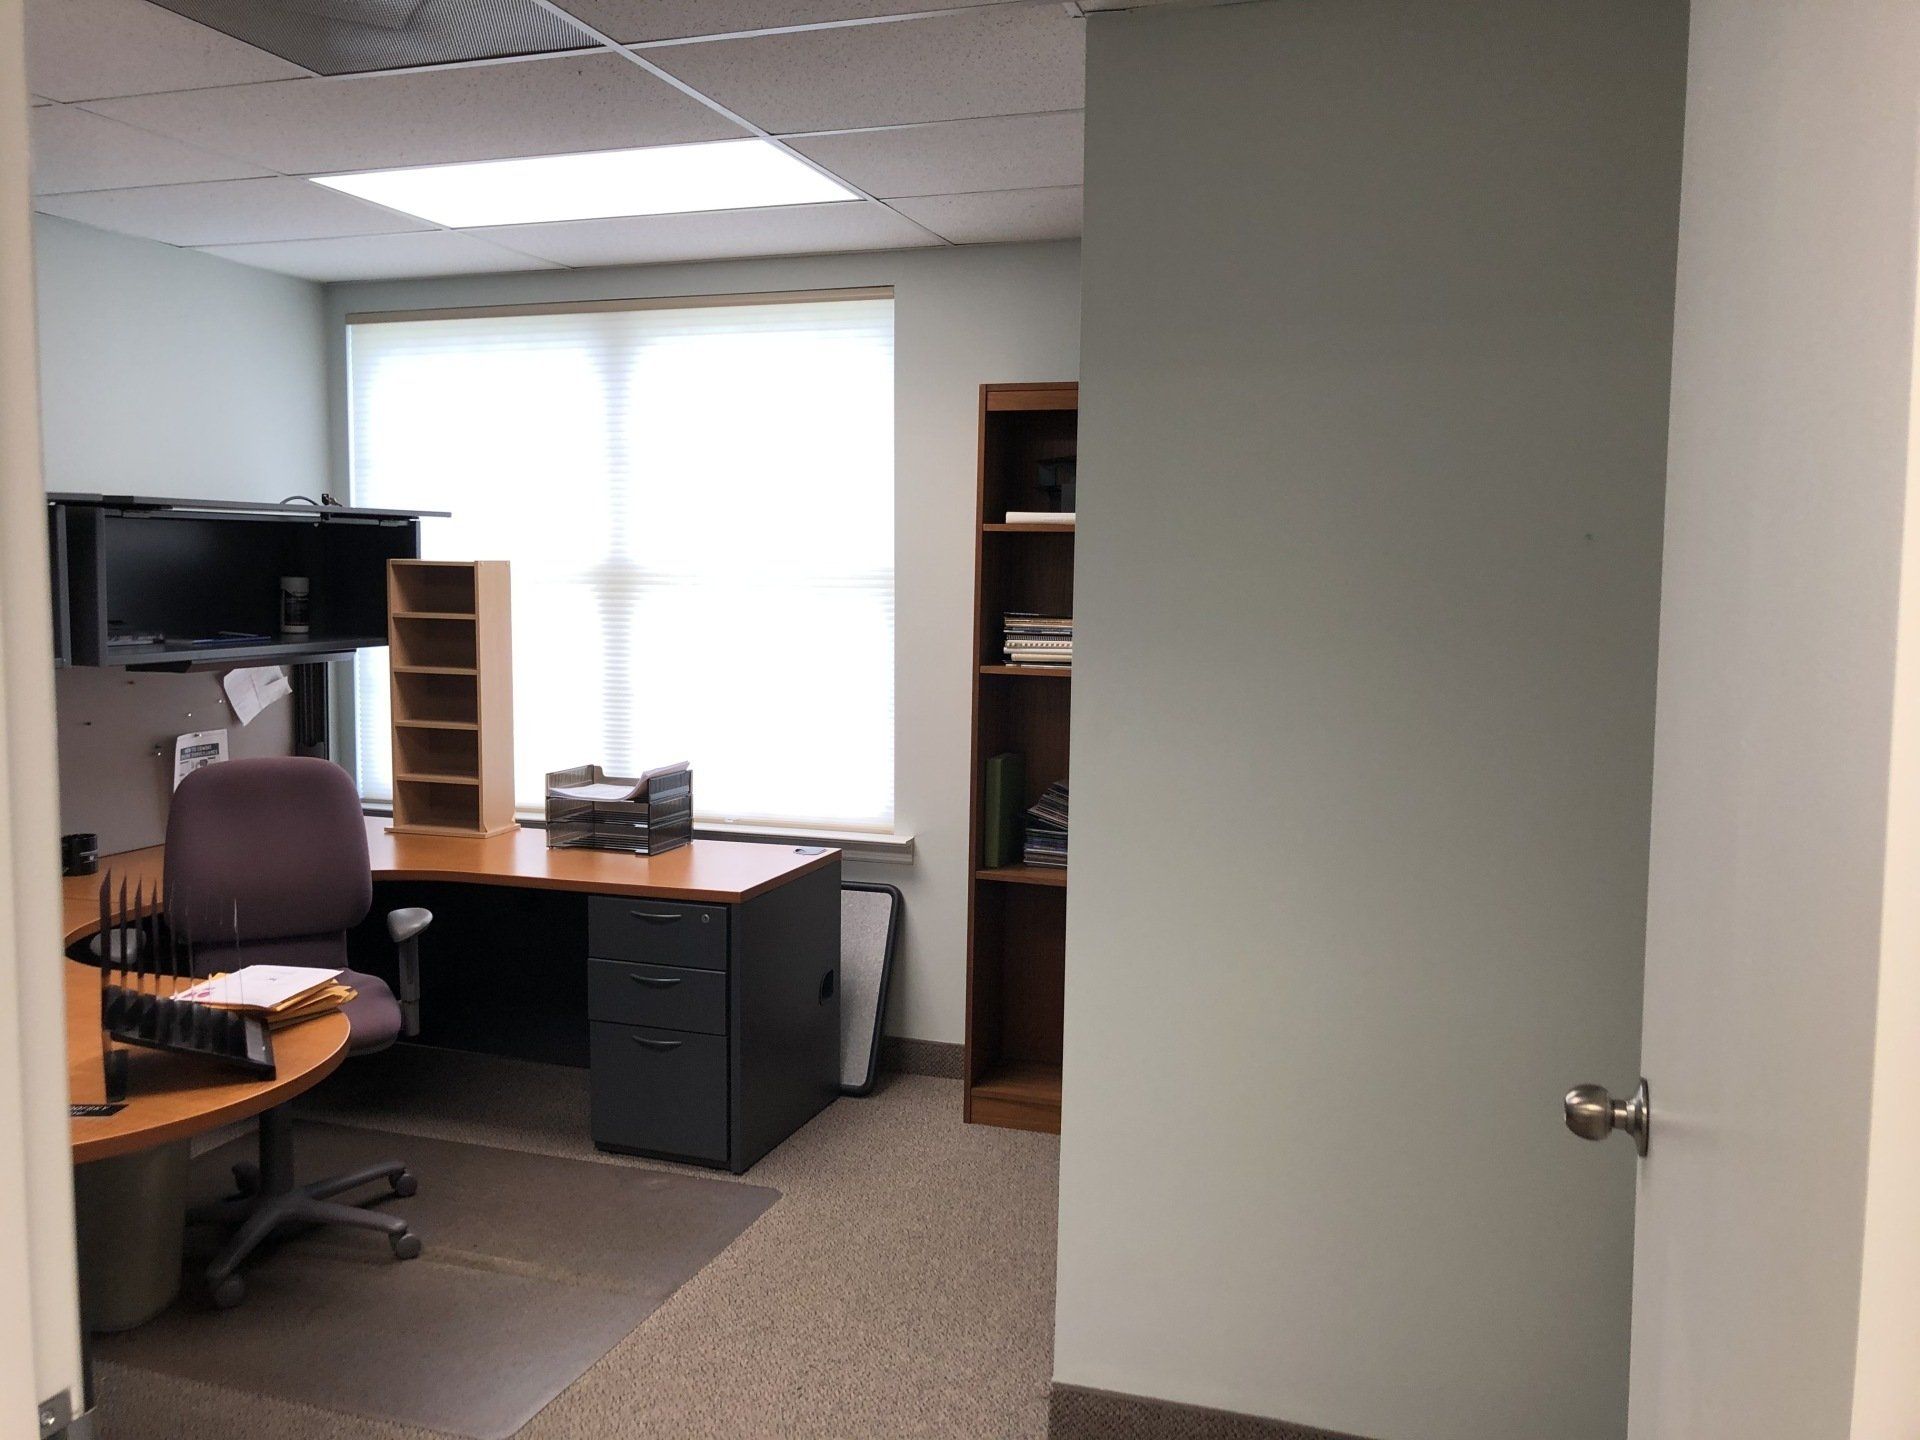 Office Condo Private Office Desk — Clifton, NJ — Evergreen Commercial Real Estate Brokers Inc